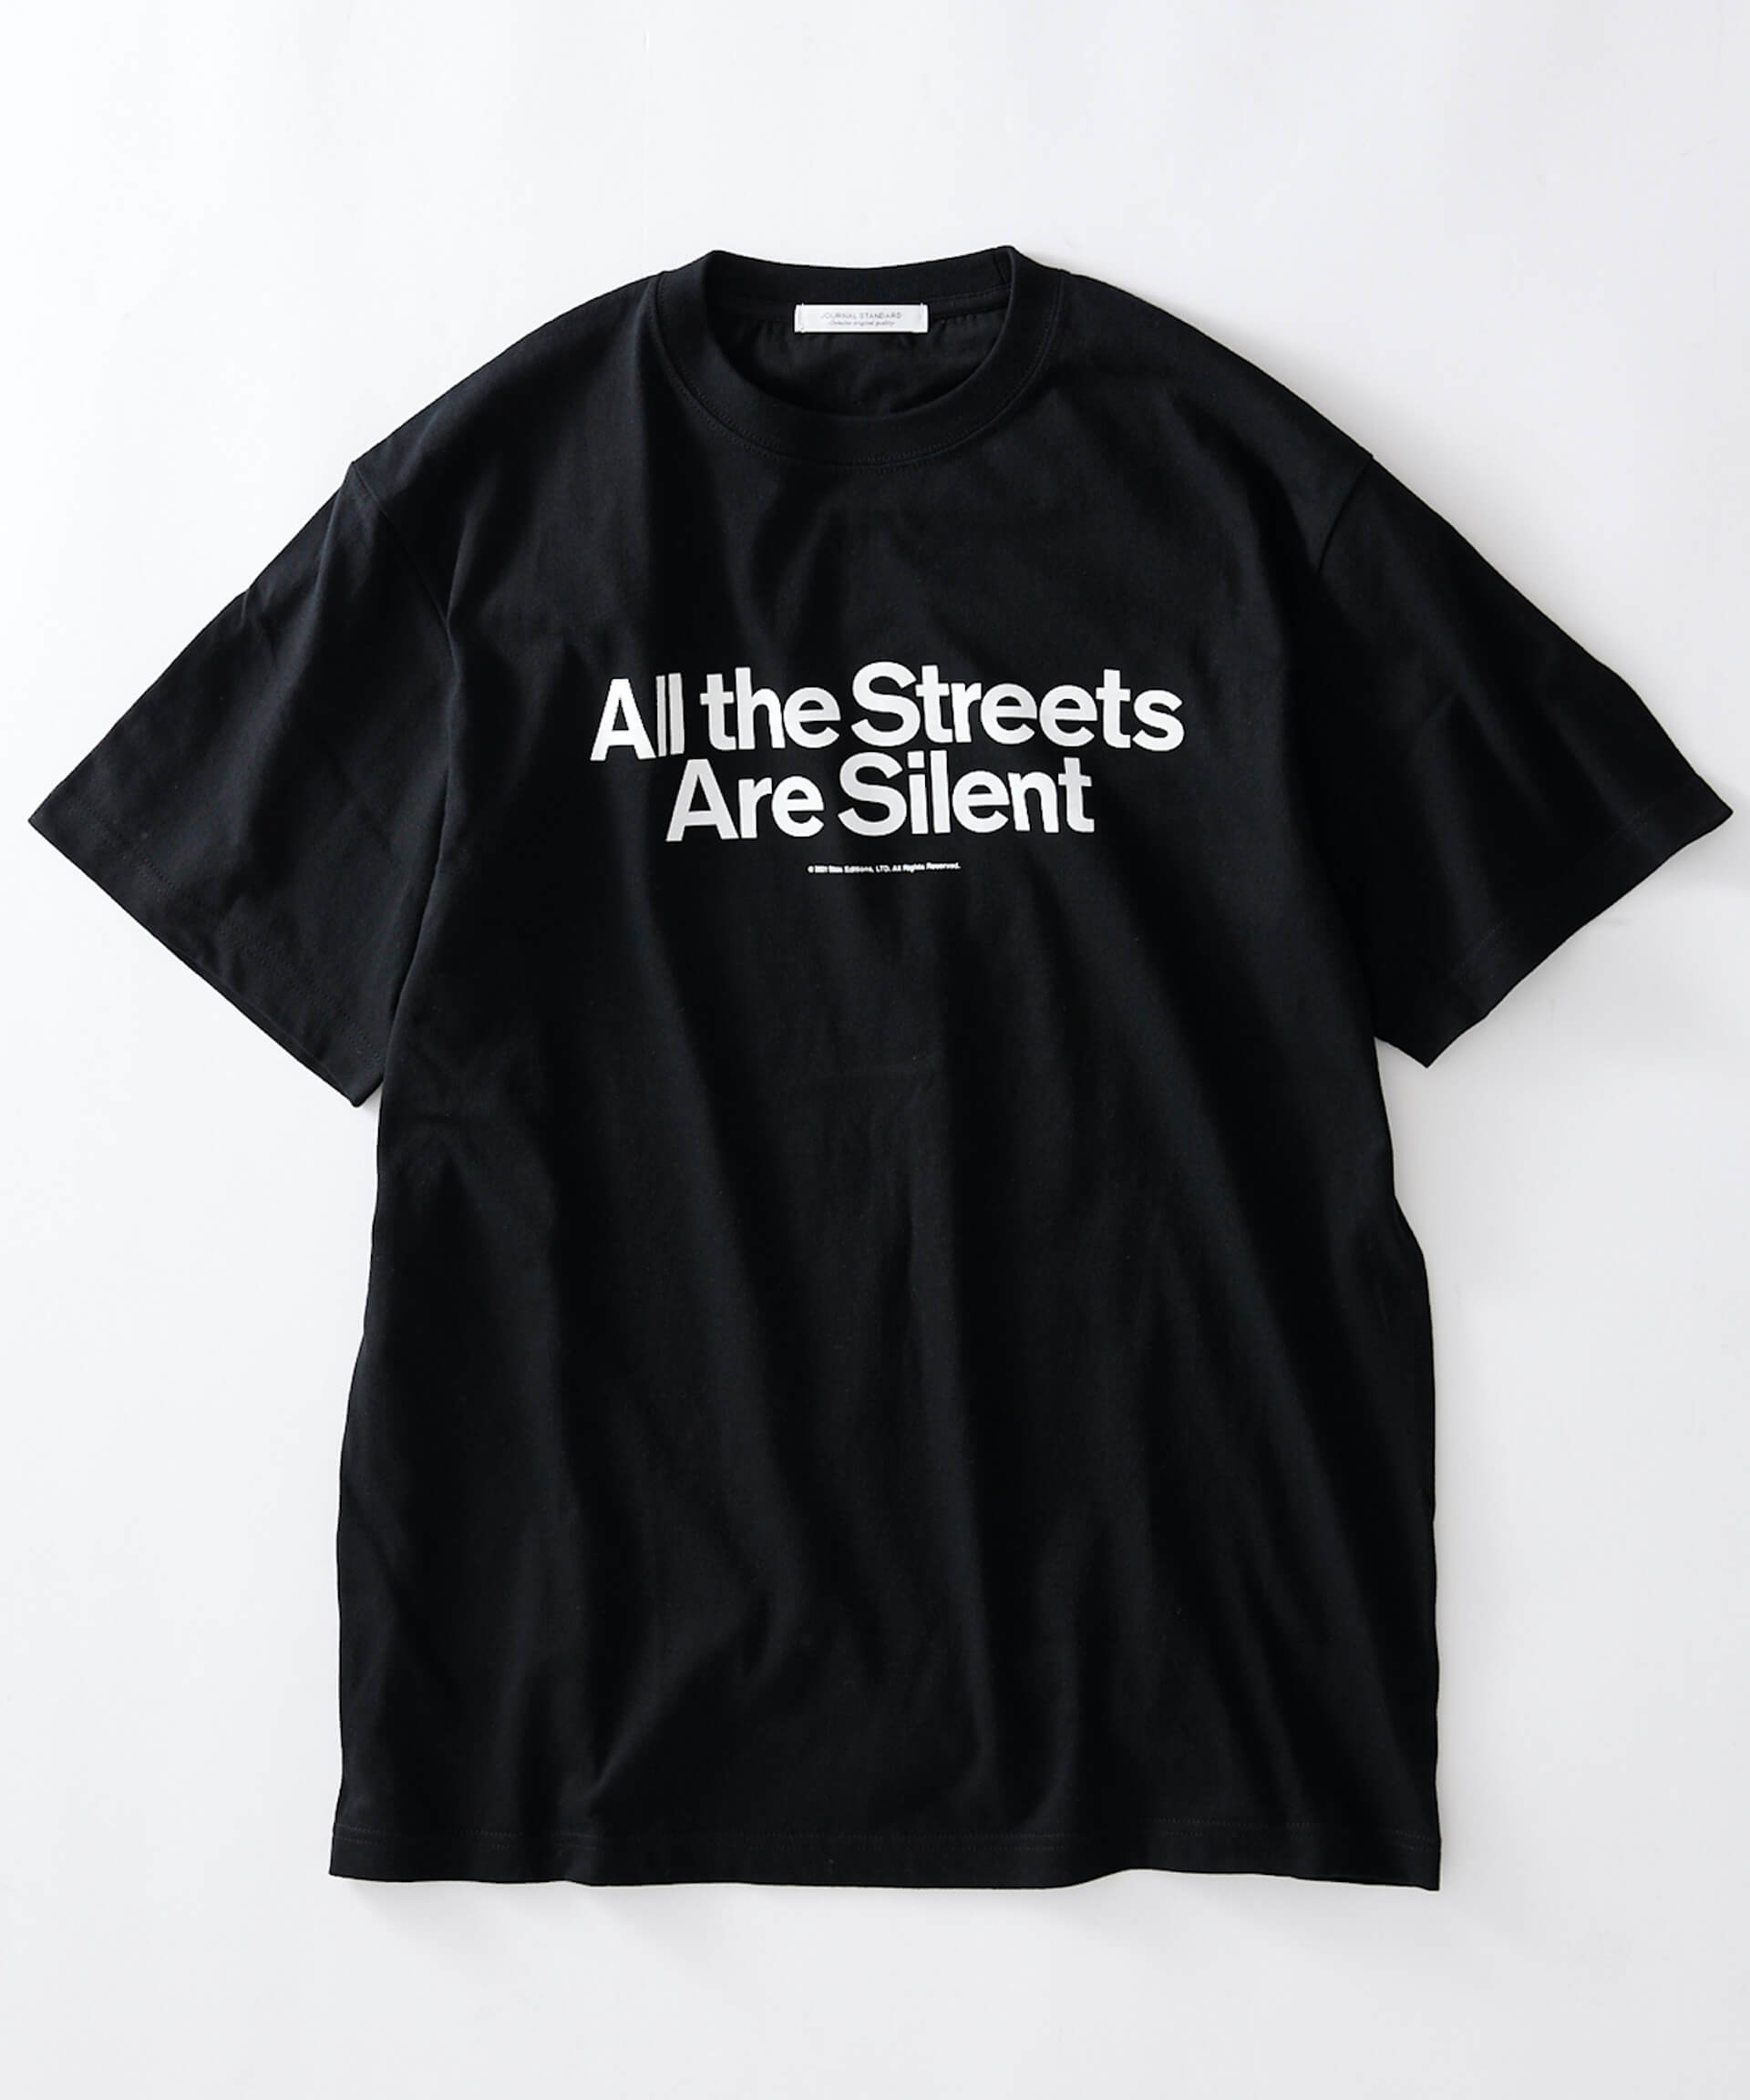 JOURNAL STANDARDと映画『All the Streets Are Silent』のコラボアイテムが登場 fashion221025-journalstandard2